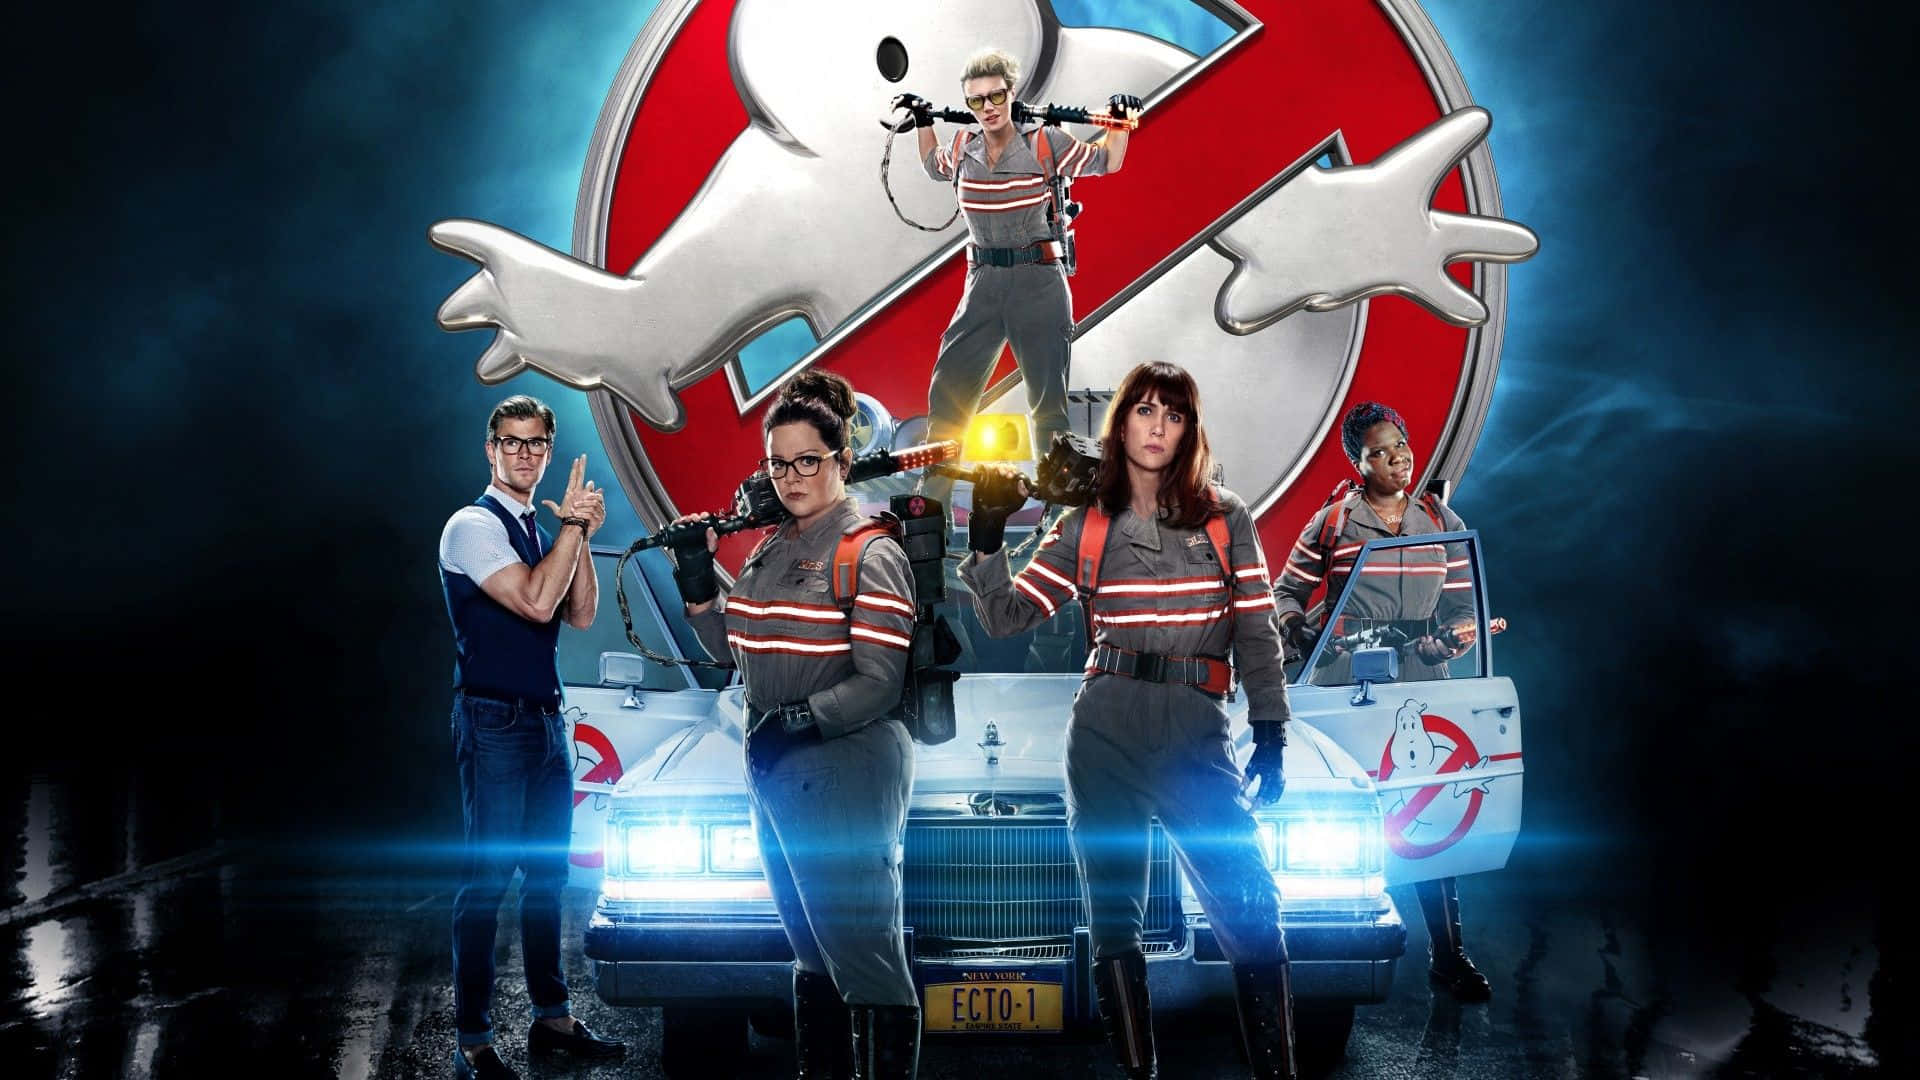 The classic Ghostbusters team ready to fight the paranormal